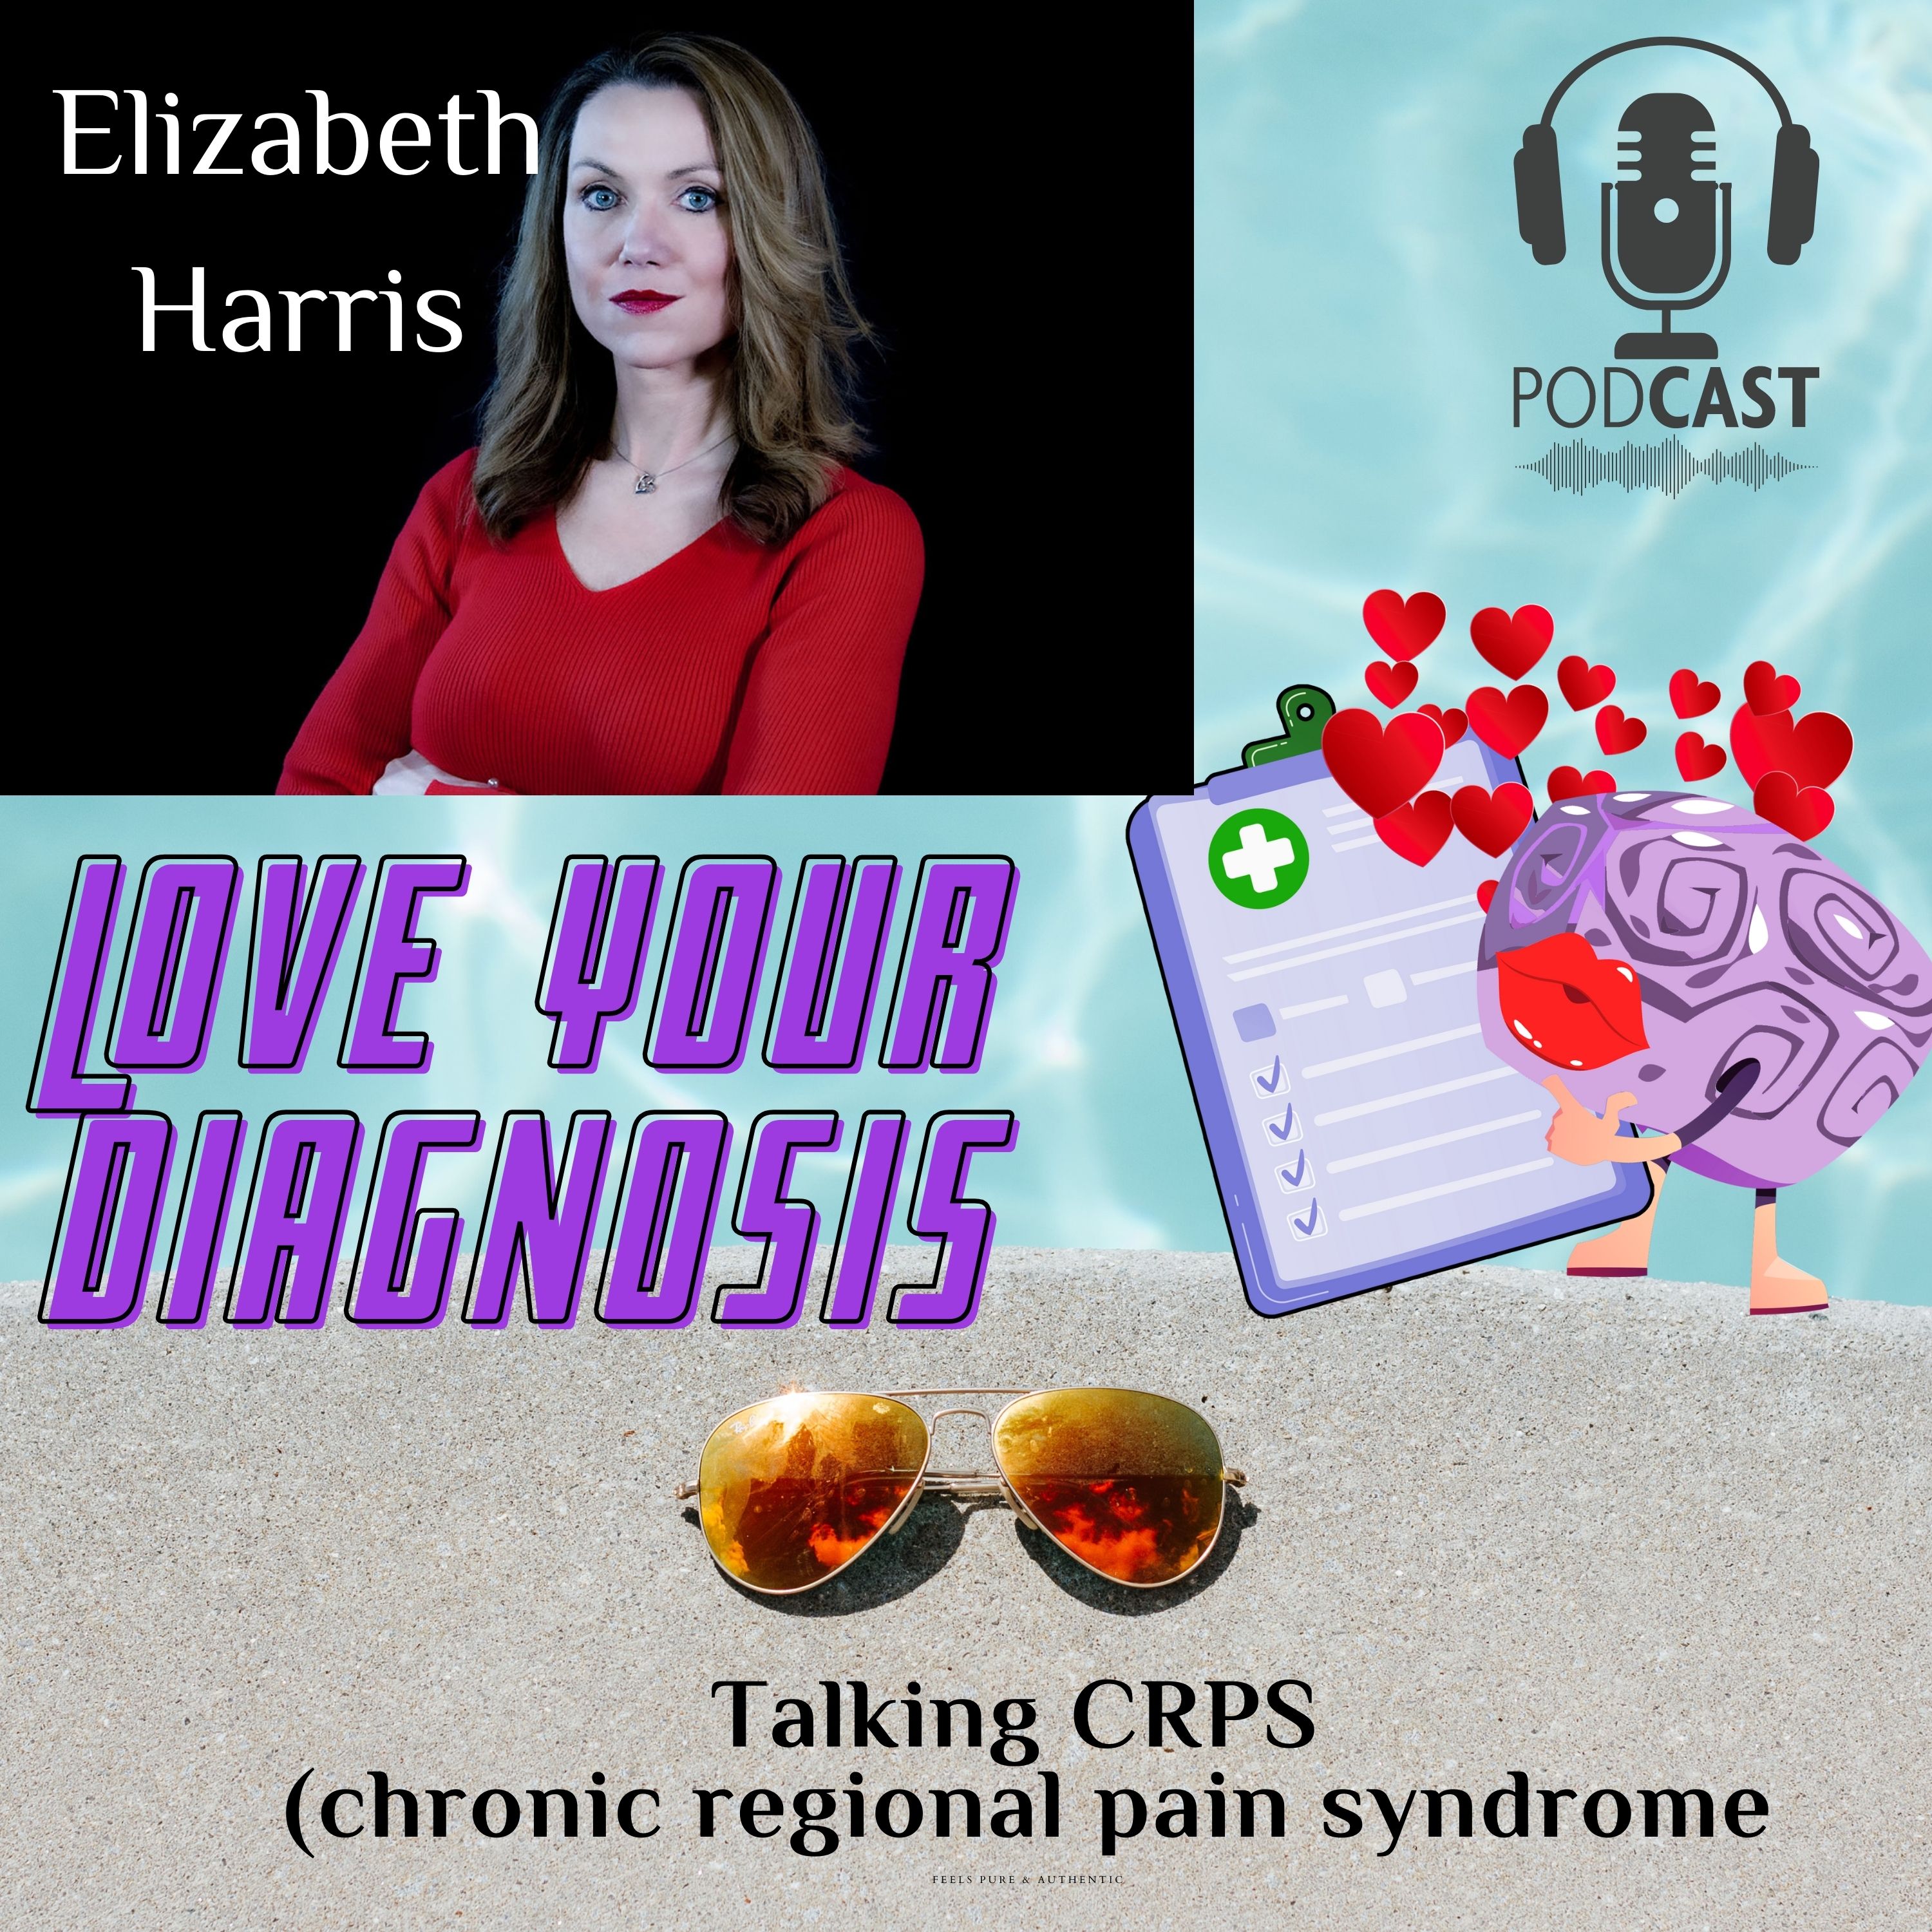 Artwork for podcast Love your Diagnosis